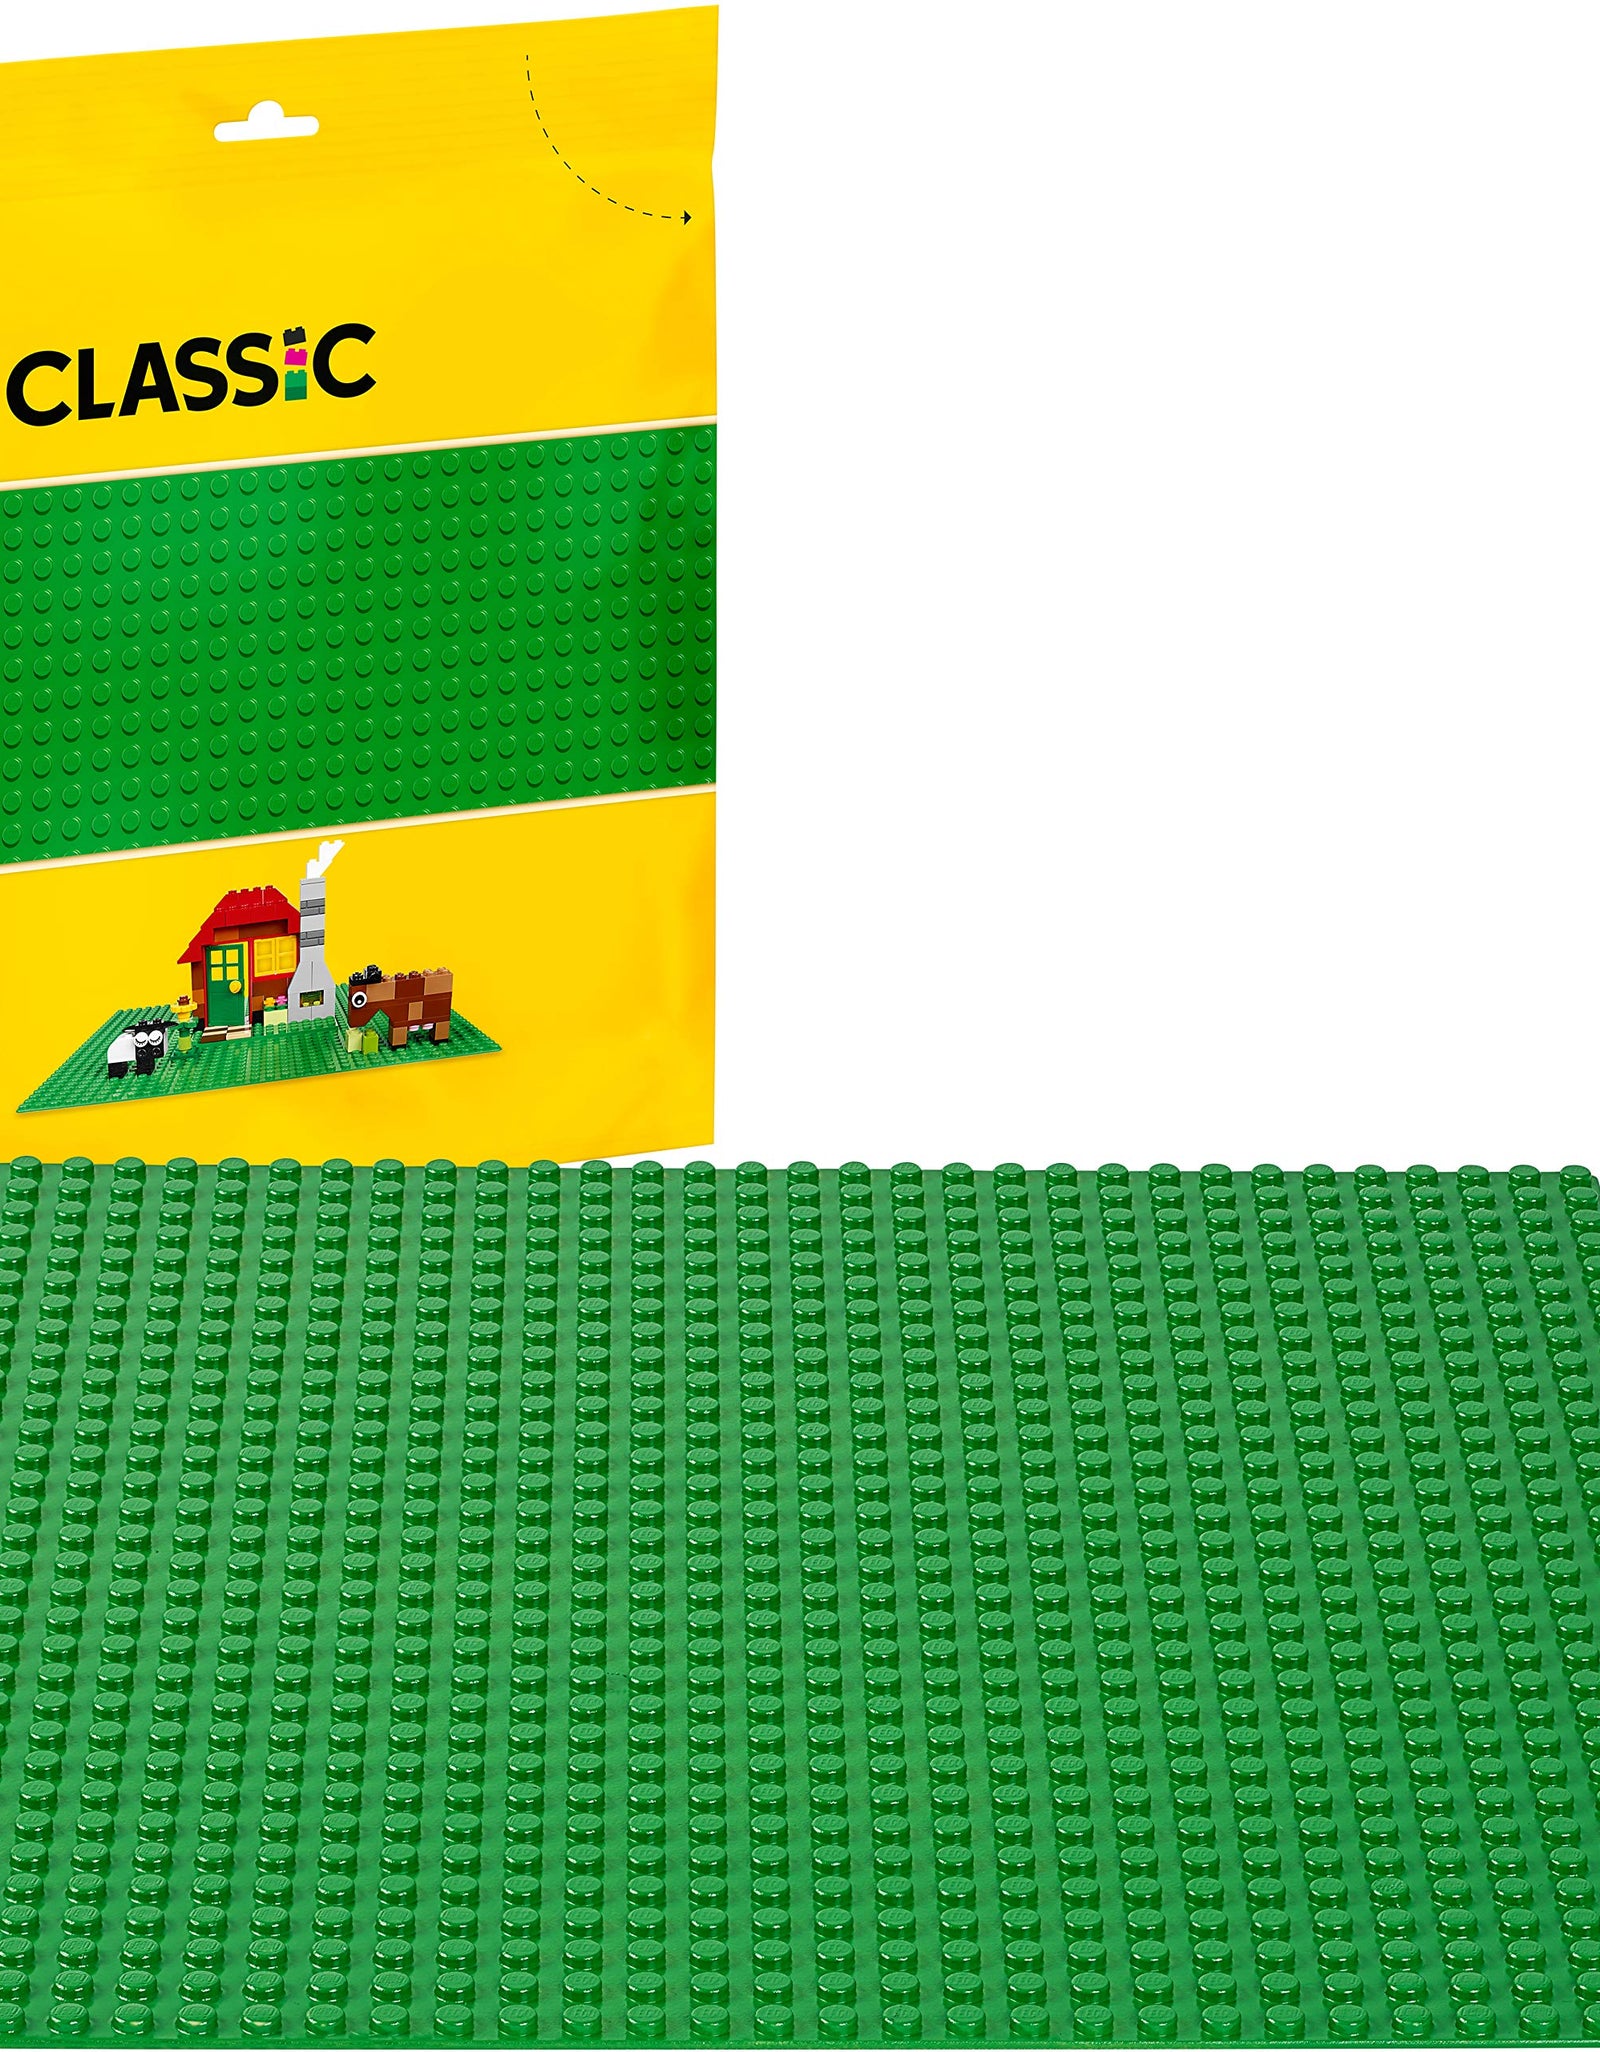 LEGO Classic Green Baseplate 2304 Supplement for Building, Playing, and Displaying Creations, 10in x 10in, Large Building Base Accessory for Kids and Adults (1 Piece)